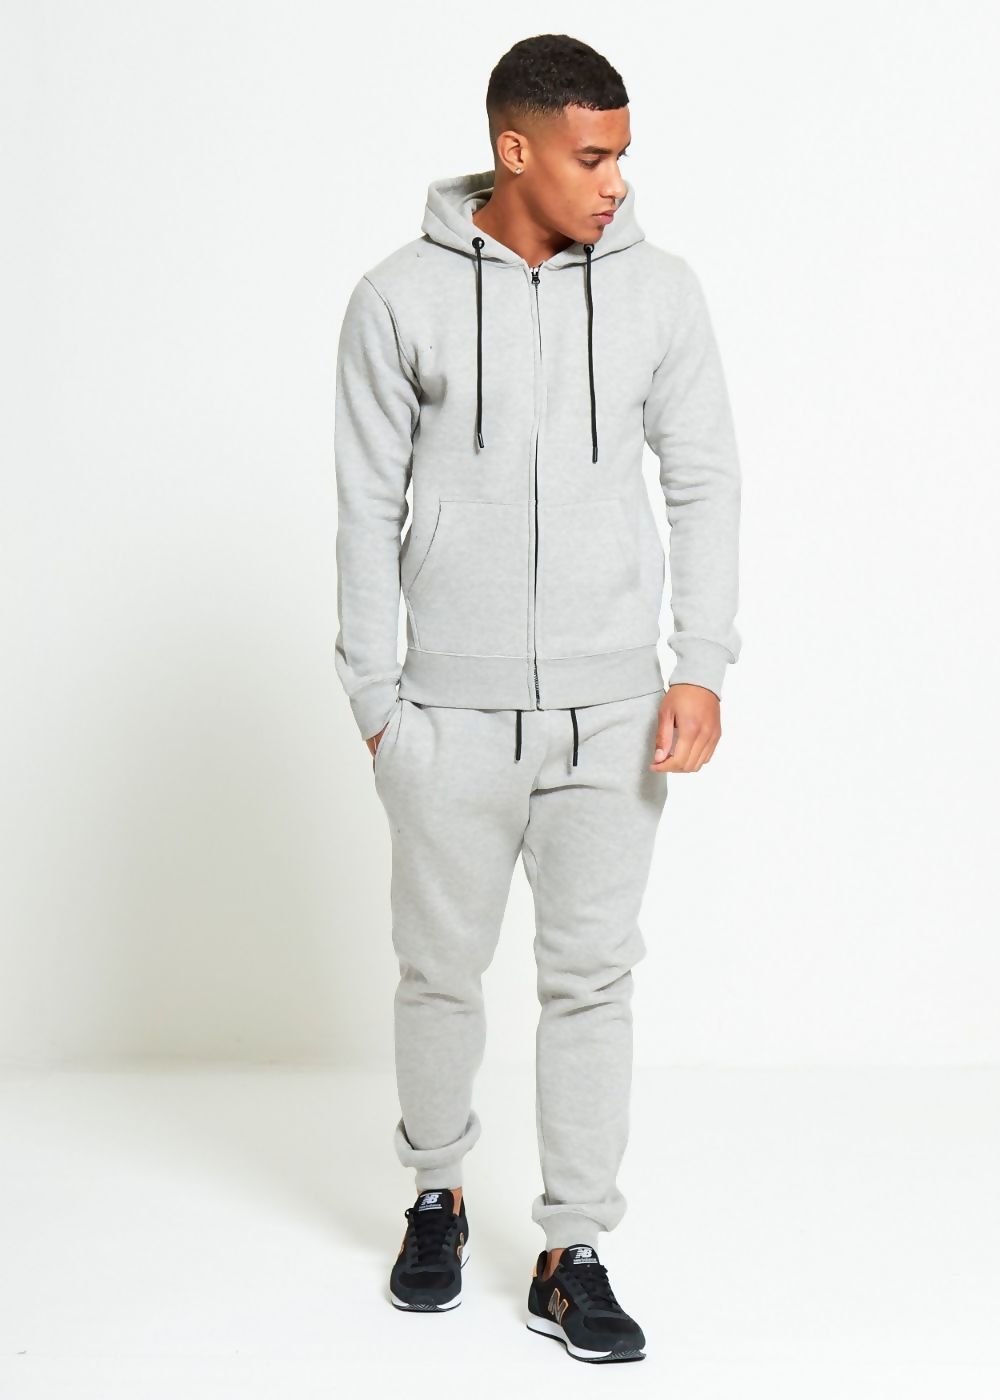 Grey Comfy Hooded Tracksuit Set with Zipper